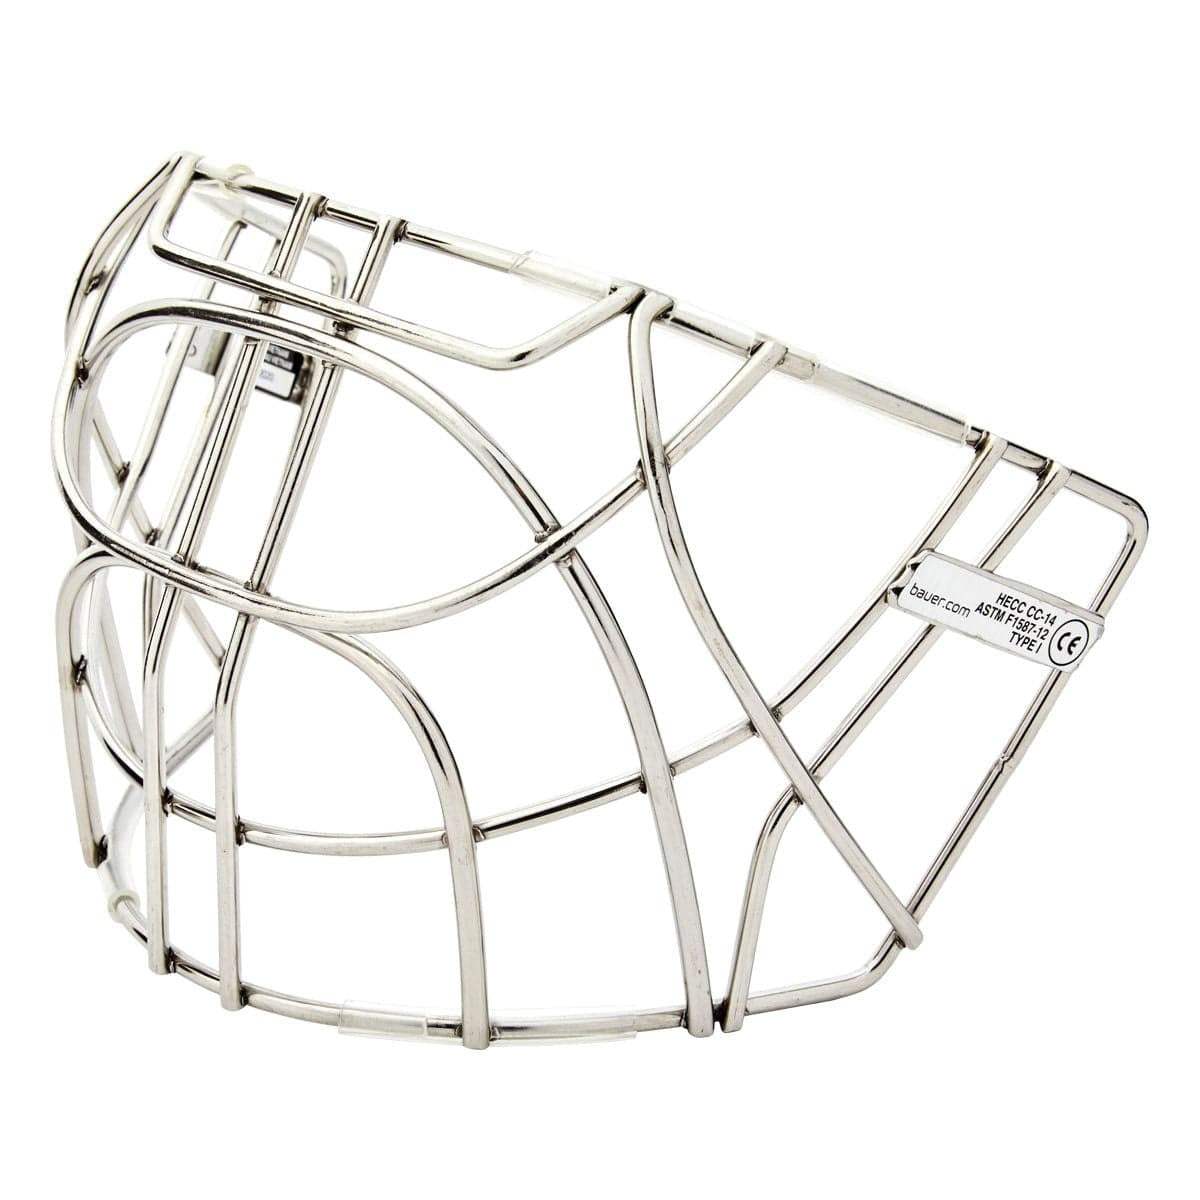 Bauer Certified Cateye Replacement Senior Goalie Cage